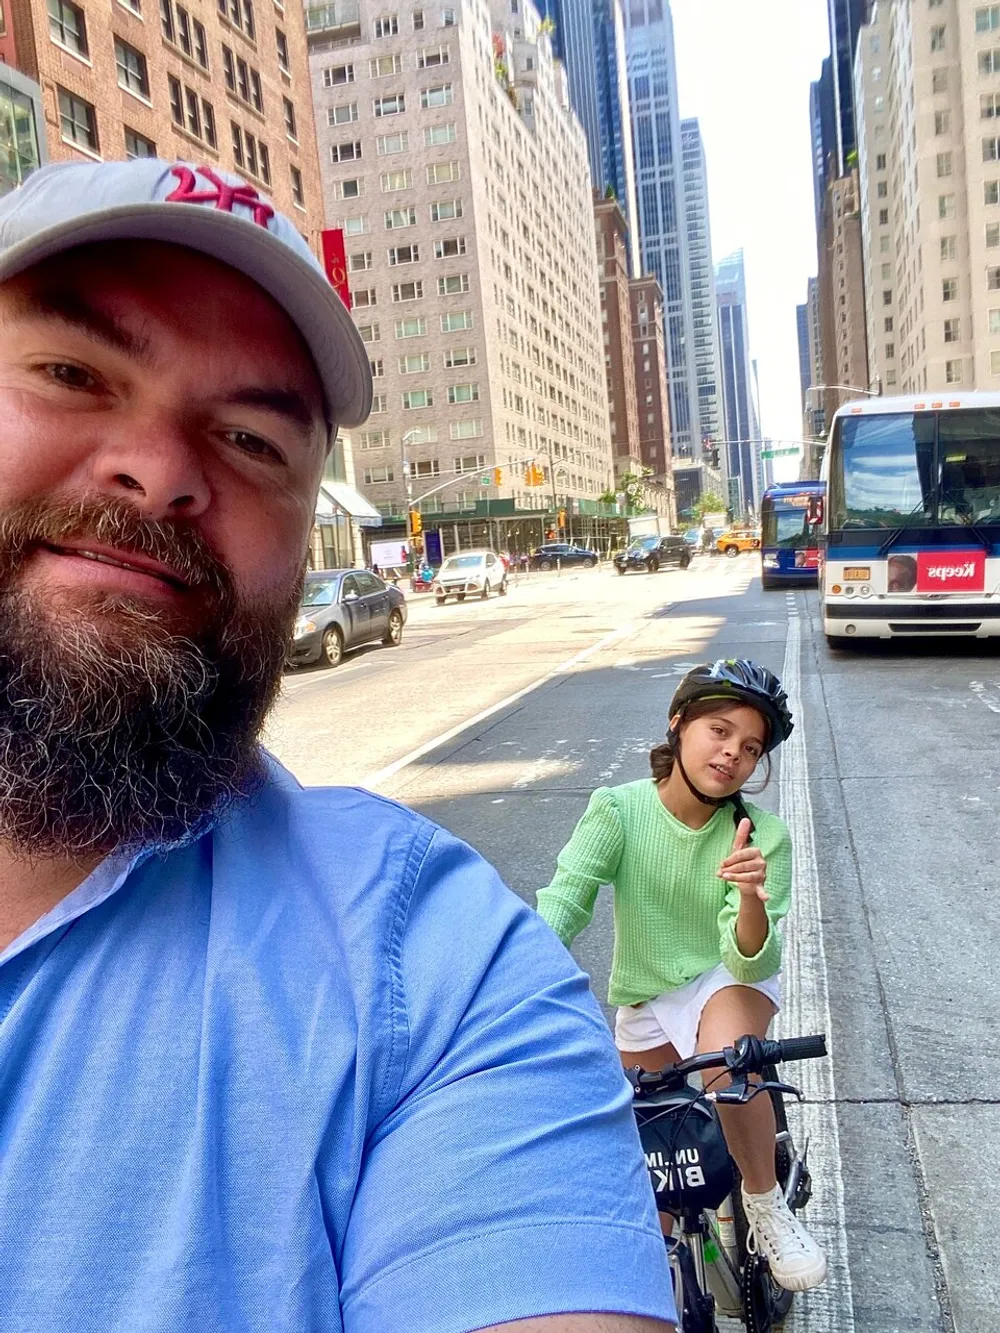 A person takes a selfie while another person rides a bike behind them on a city street